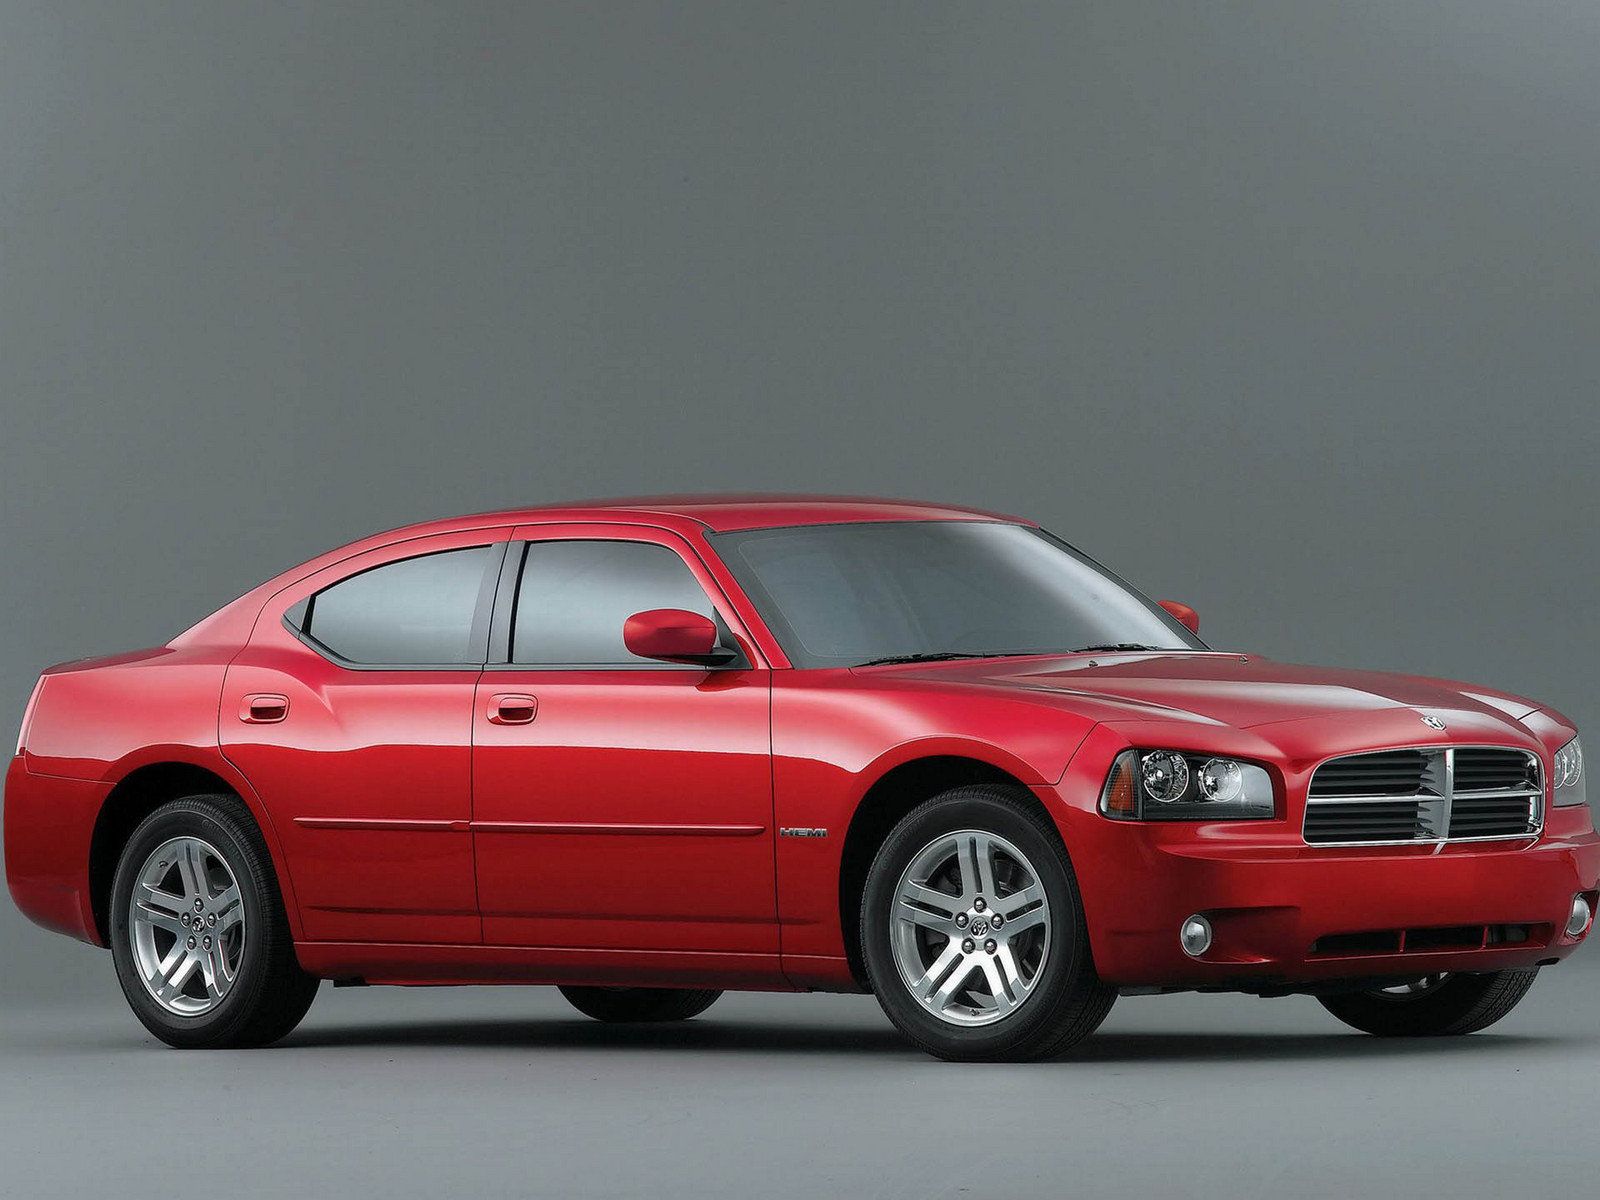 2006-dodge-charger-rt In Red Side View In Studio